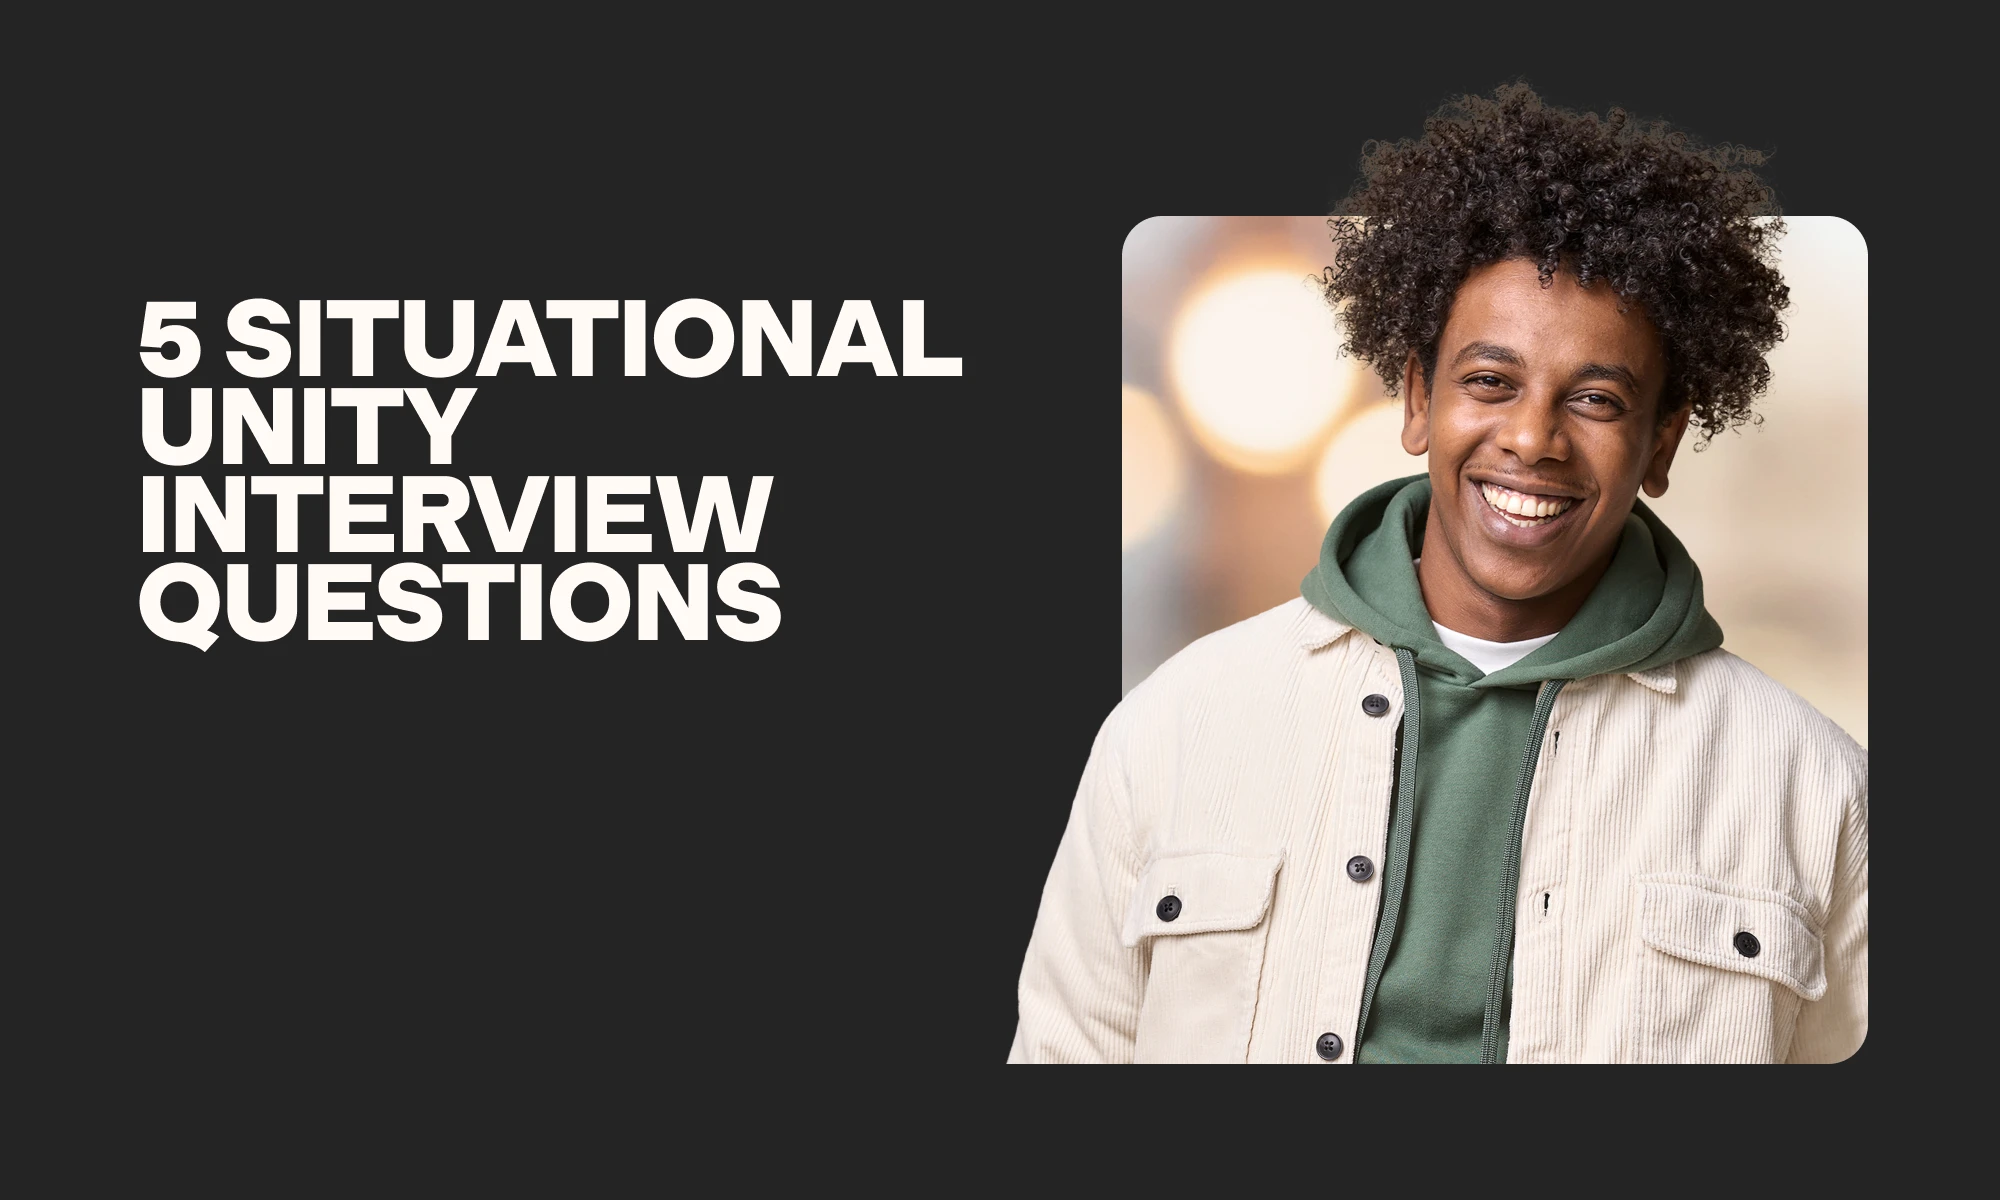 5 situational Unity interview questions and answers to ask applicants